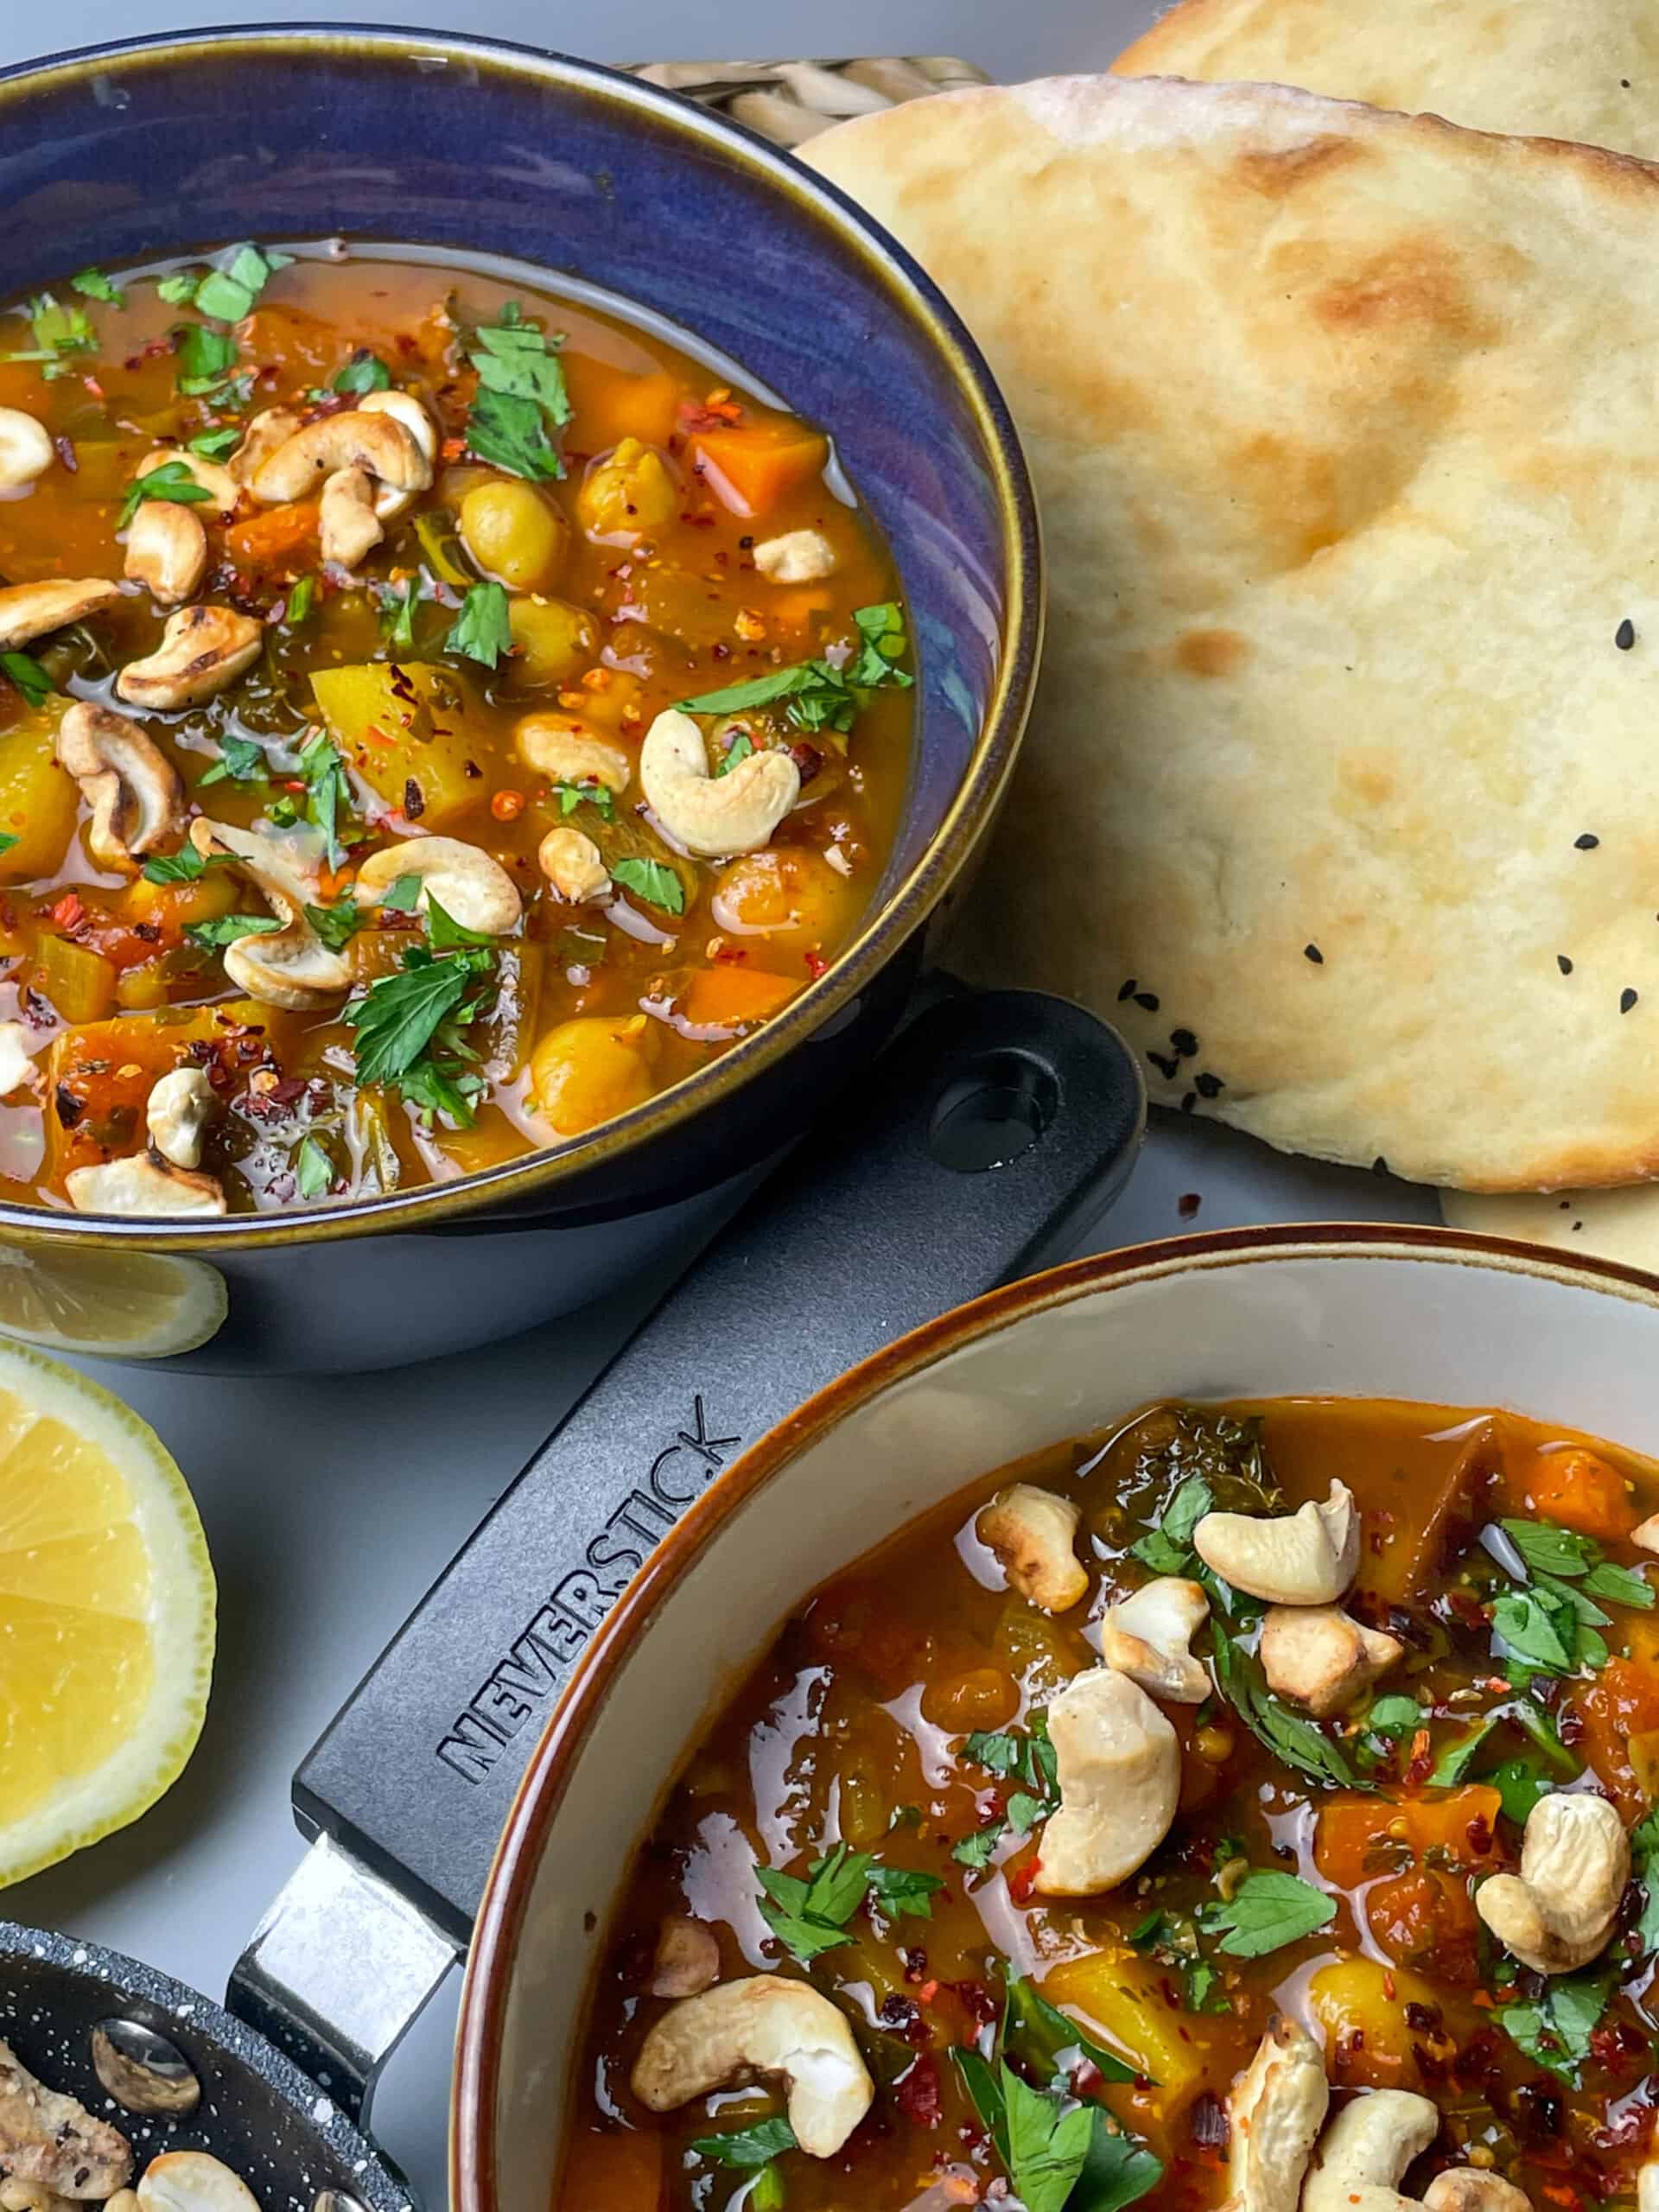 Two side views of bowls of chickpea soup, with naan breads to side, a small glimpse of fresh lemon and a skillet handle to side.